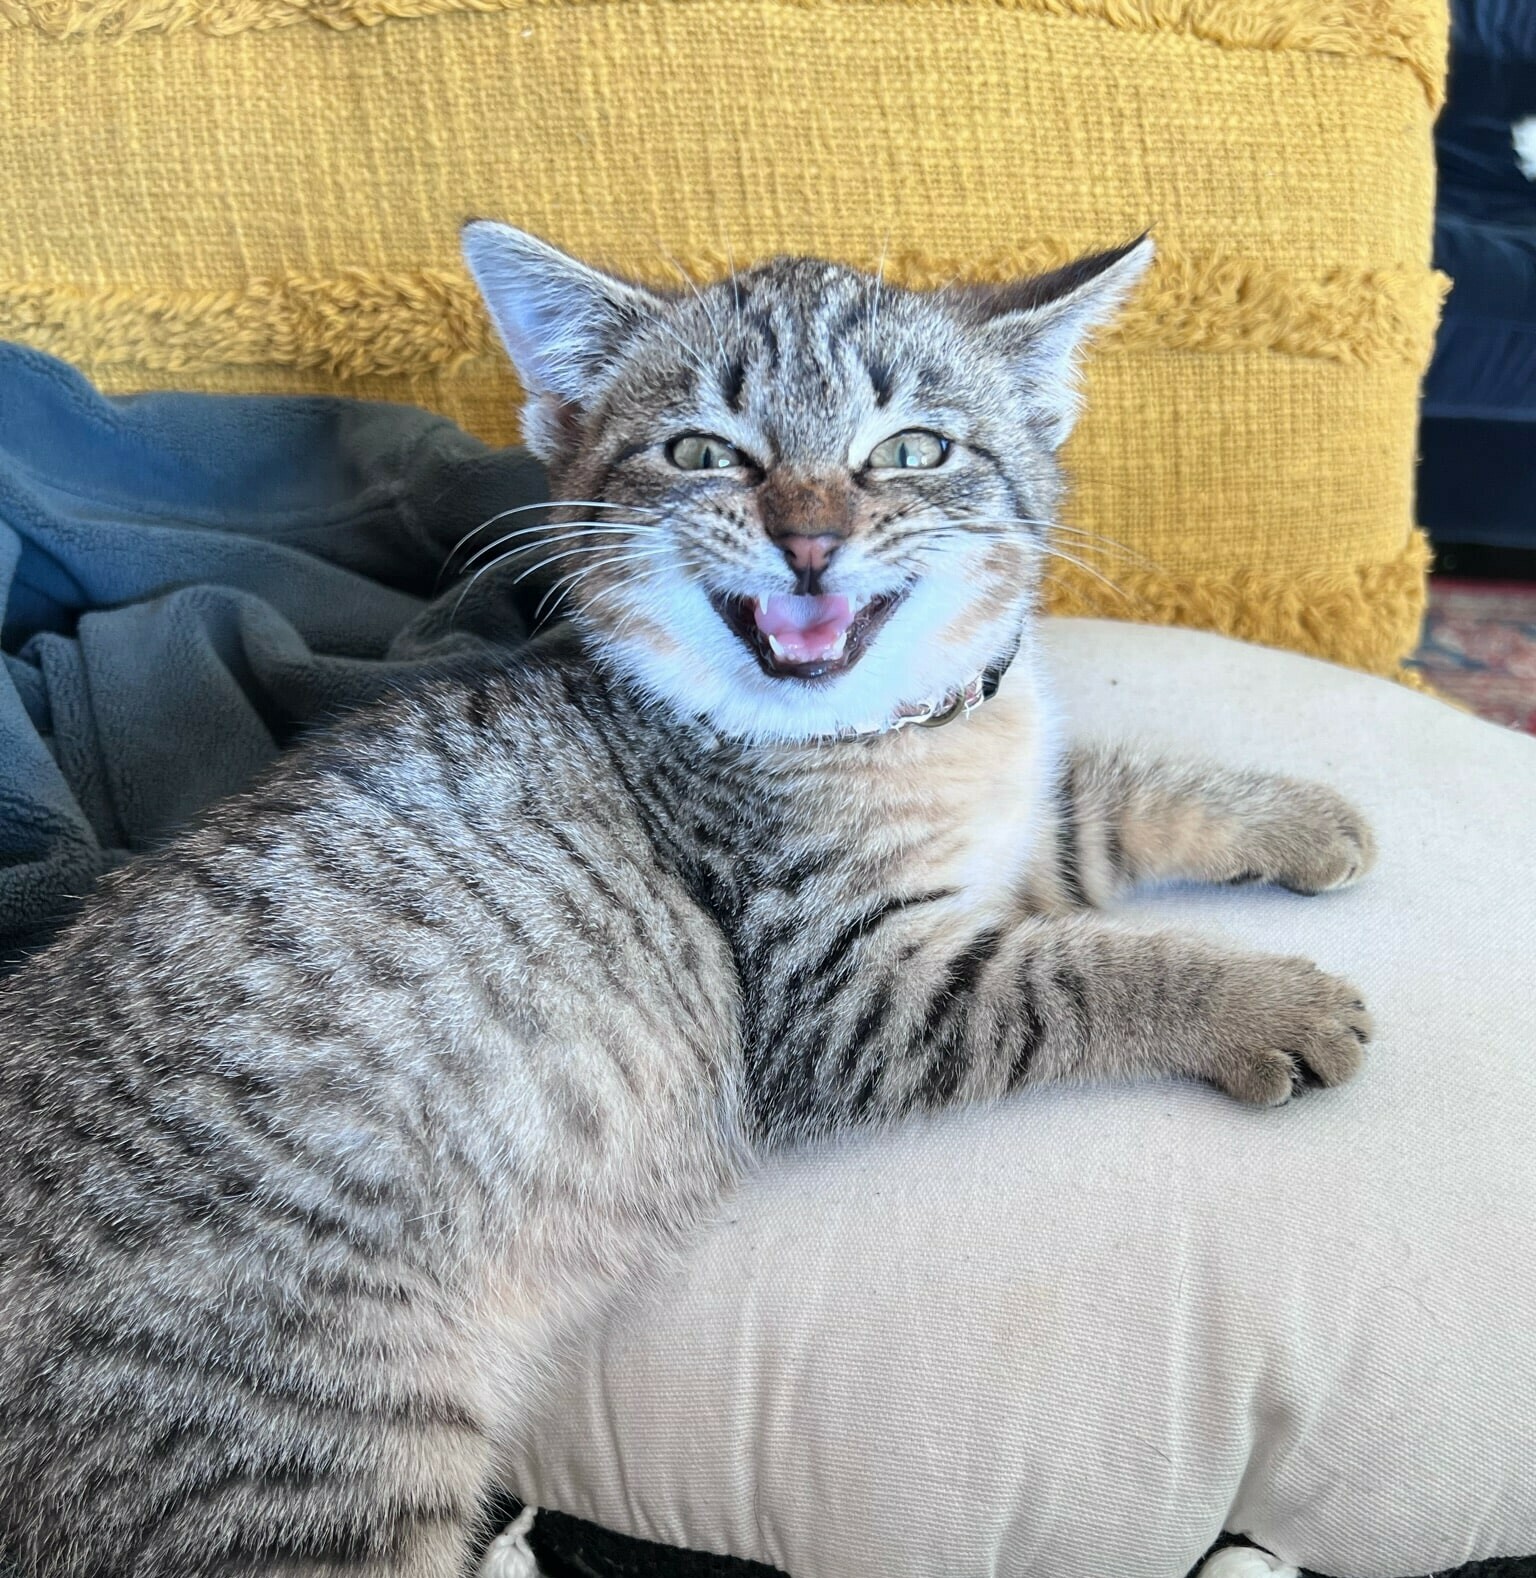 Logan the cat smiles with ear up while laying on pillows.